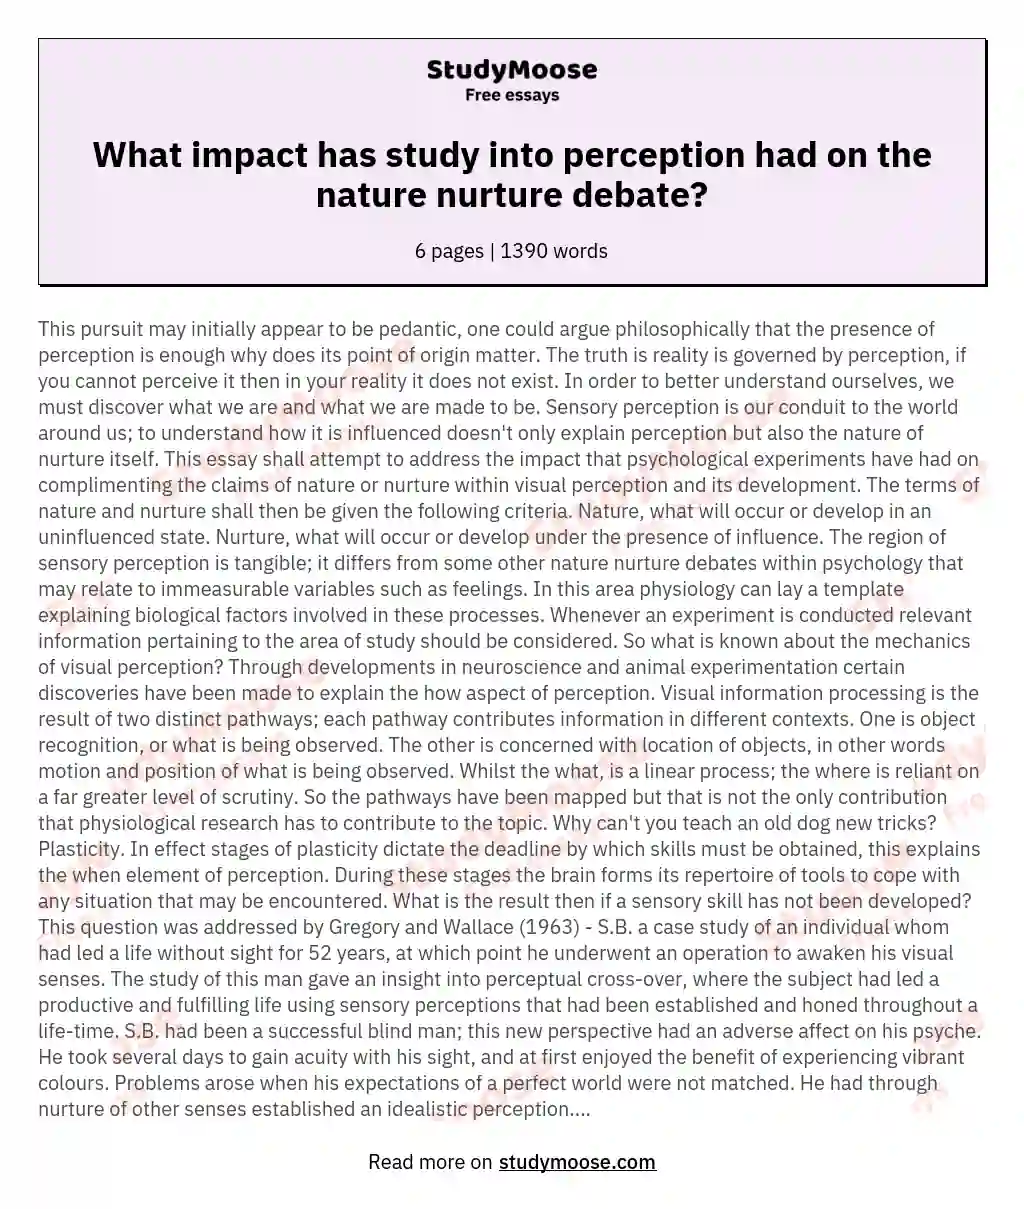 What impact has study into perception had on the nature nurture debate?